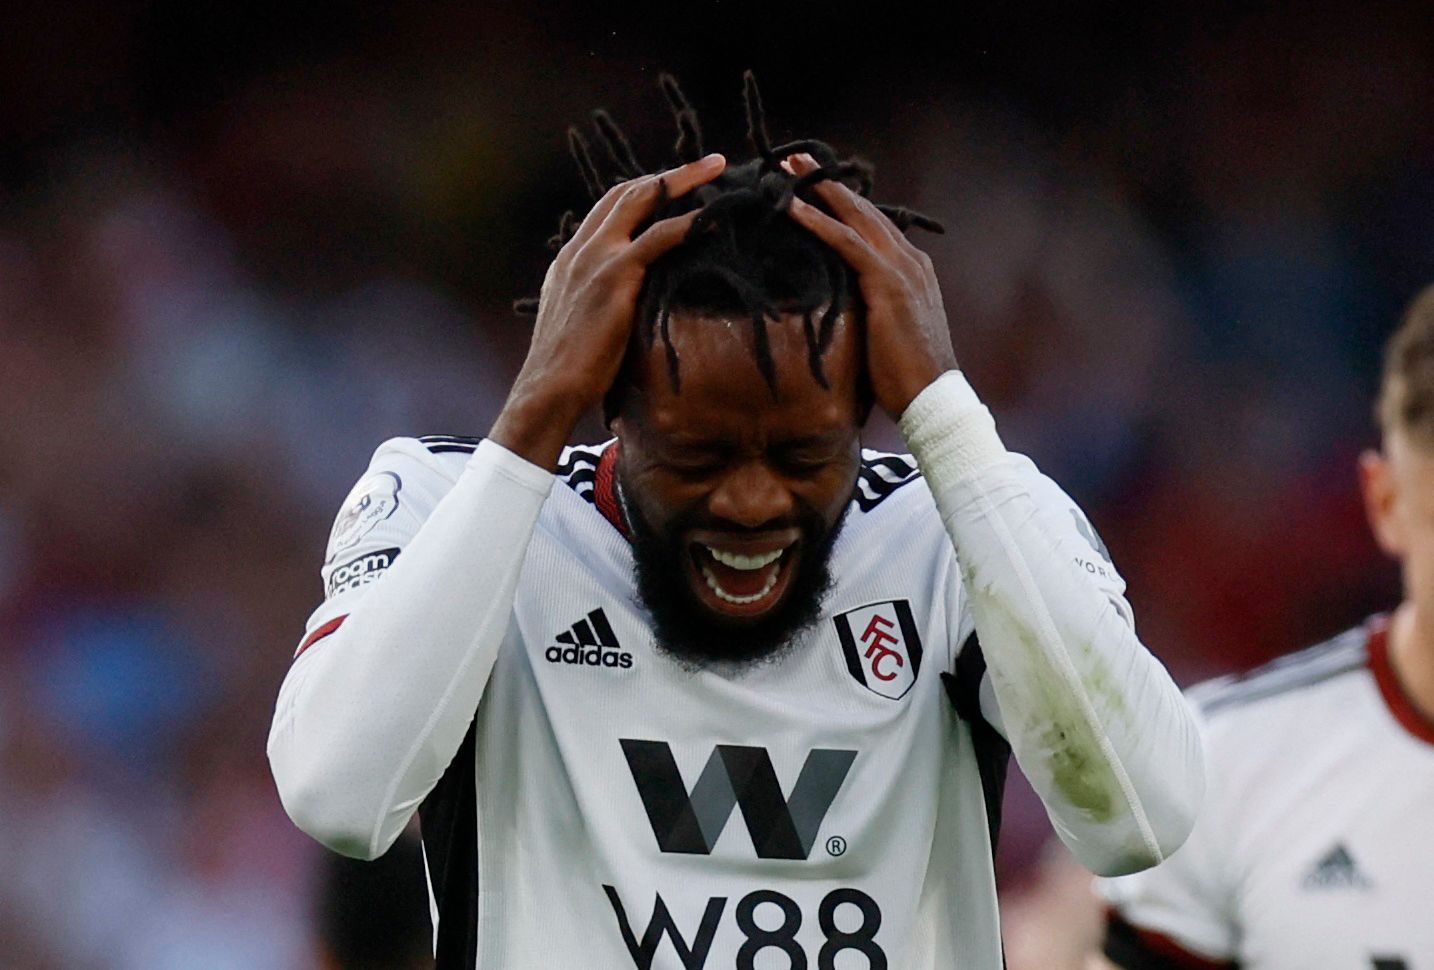 Soccer Football - Premier League - Arsenal v Fulham - Emirates Stadium, London, Britain - August 27, 2022 Fulham's Nathaniel Chalobah looks dejected after the match Action Images via Reuters/Andrew Couldridge EDITORIAL USE ONLY. No use with unauthorized audio, video, data, fixture lists, club/league logos or 'live' services. Online in-match use limited to 75 images, no video emulation. No use in betting, games or single club /league/player publications.  Please contact your account representativ